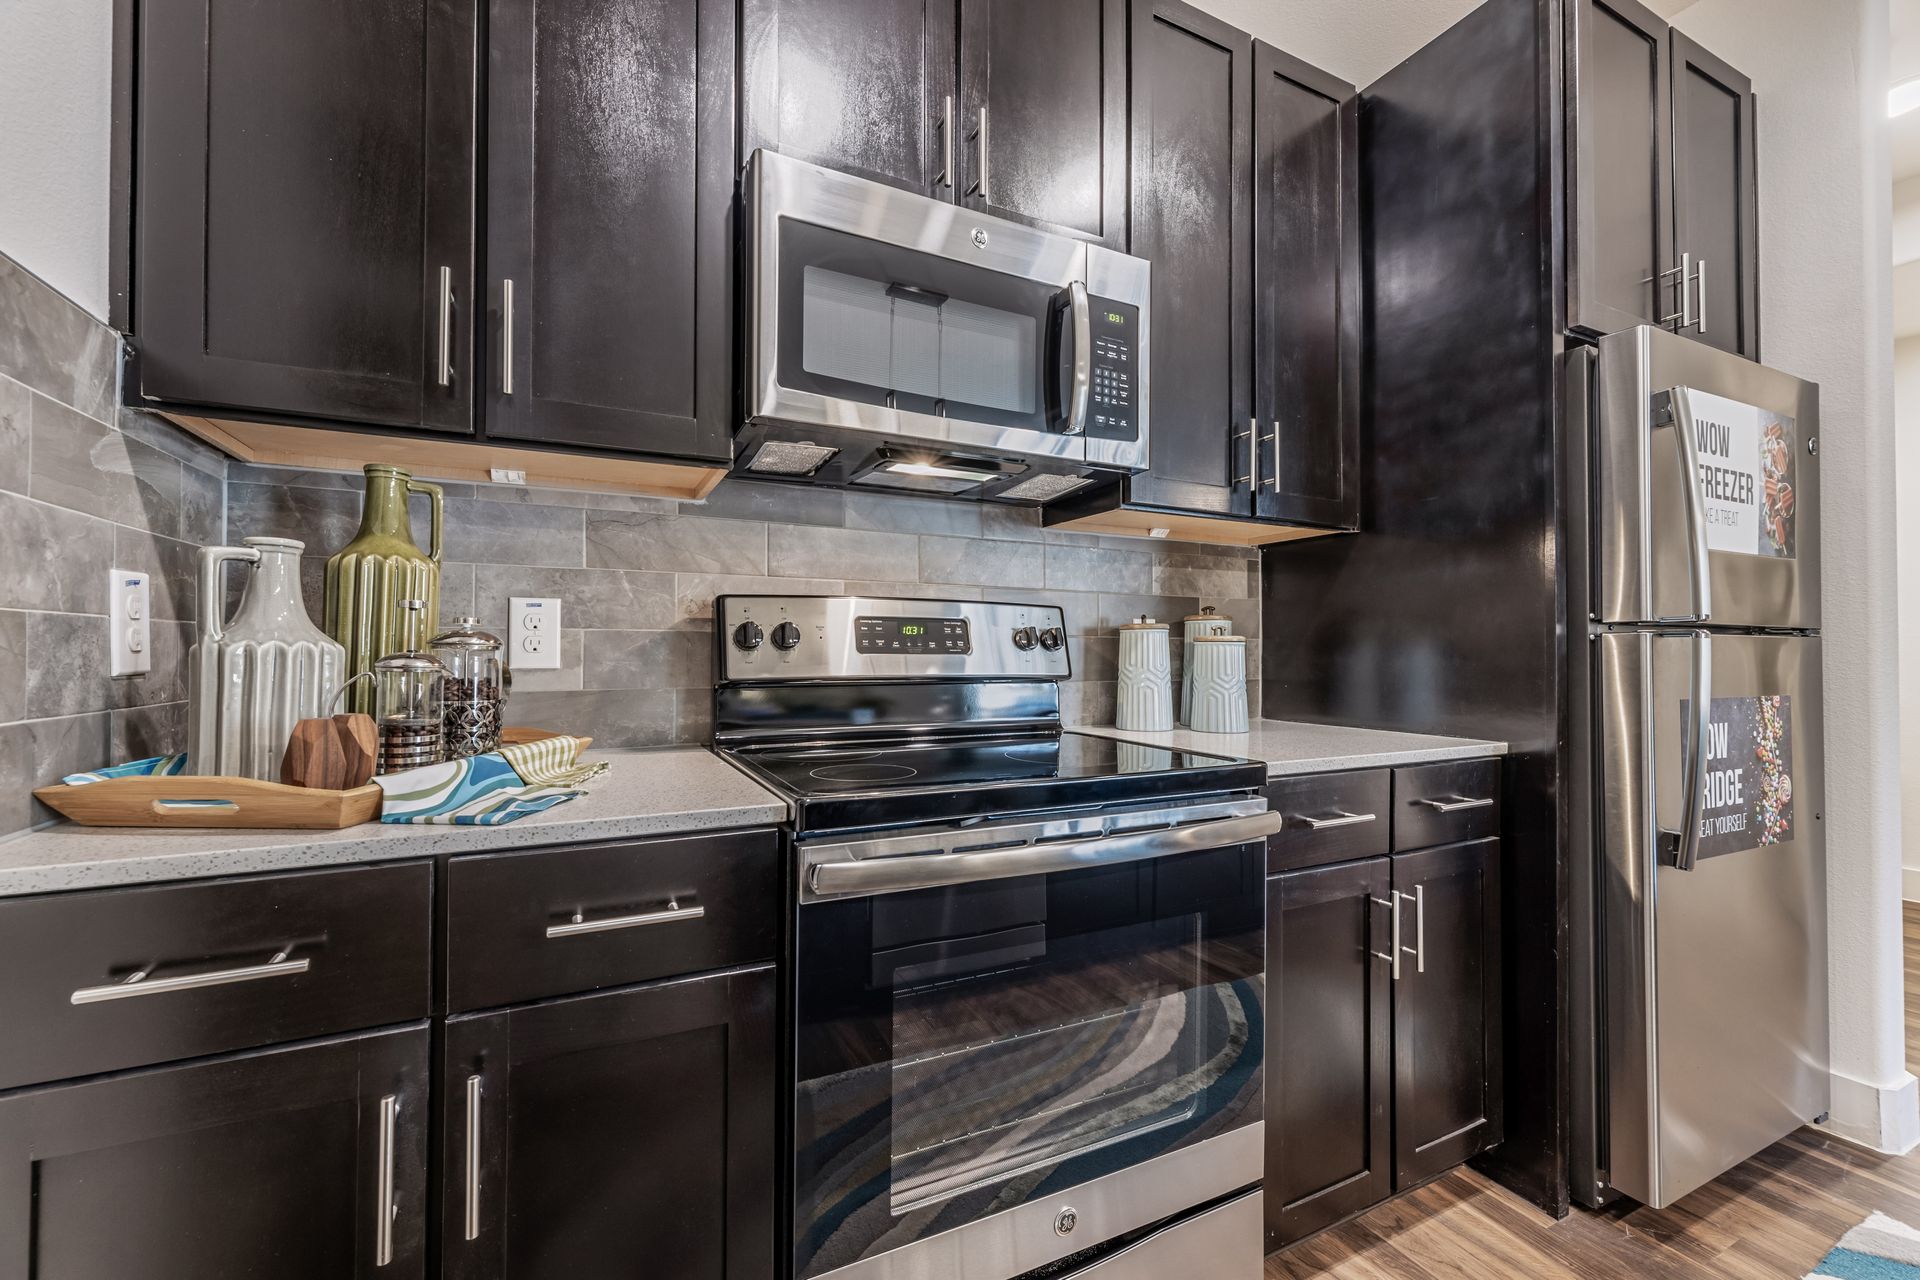 A kitchen with stainless steel appliances and black cabinets at Parkside at Craig Ranch.